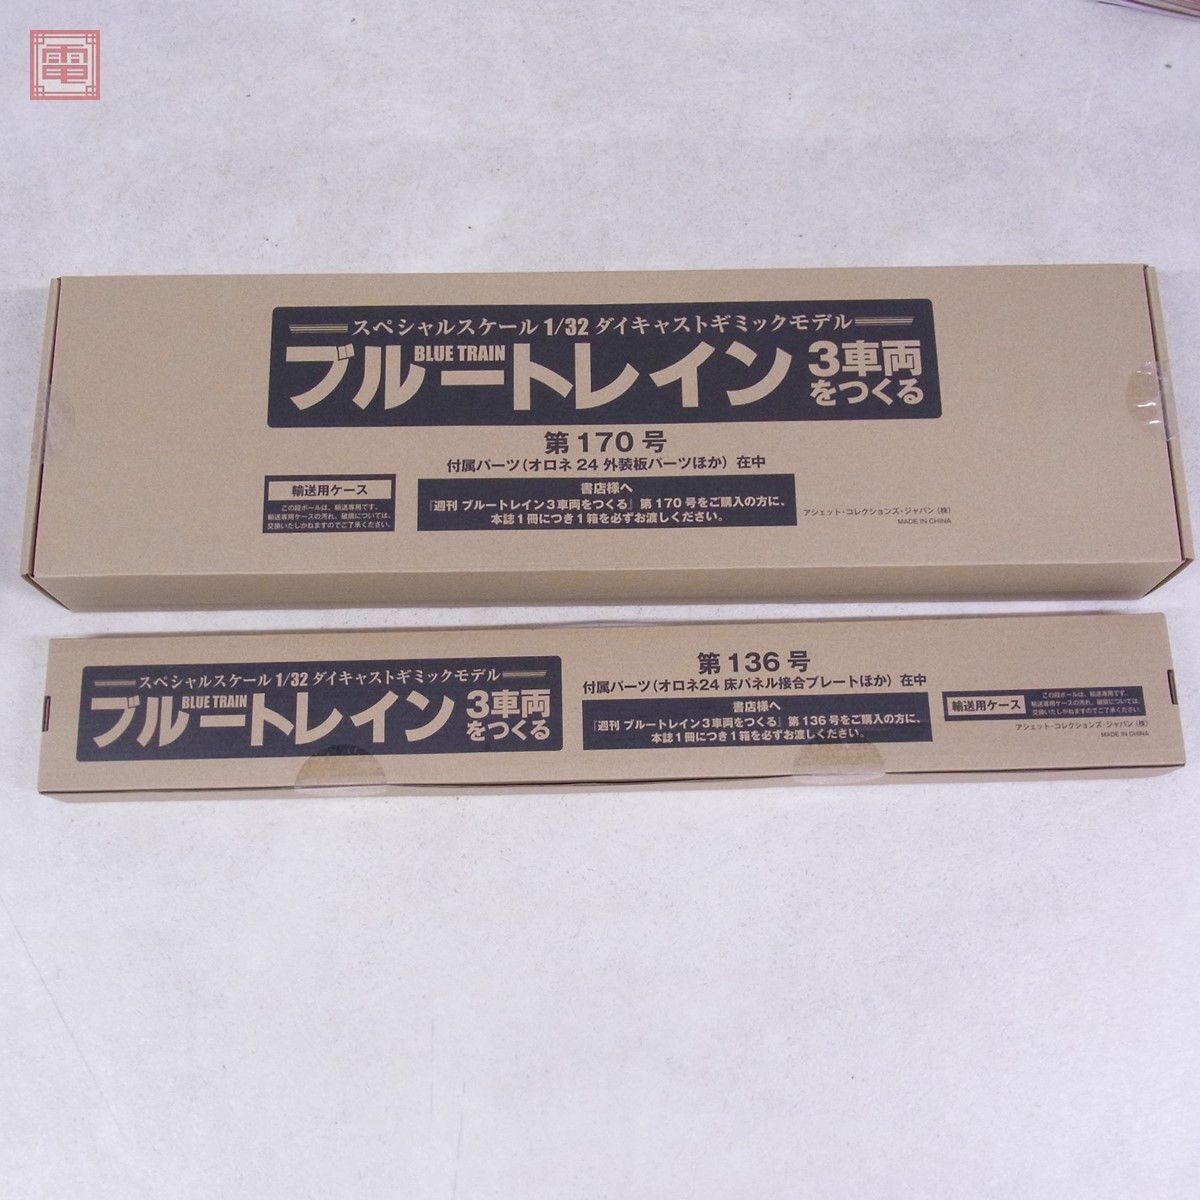  not yet constructed asheto1/32 blue to rain 3 vehicle .... extension number no. 121 number ~177 number set . pcs Special sudden [.. attaching ]A. pcs passenger car railroad model present condition goods [60